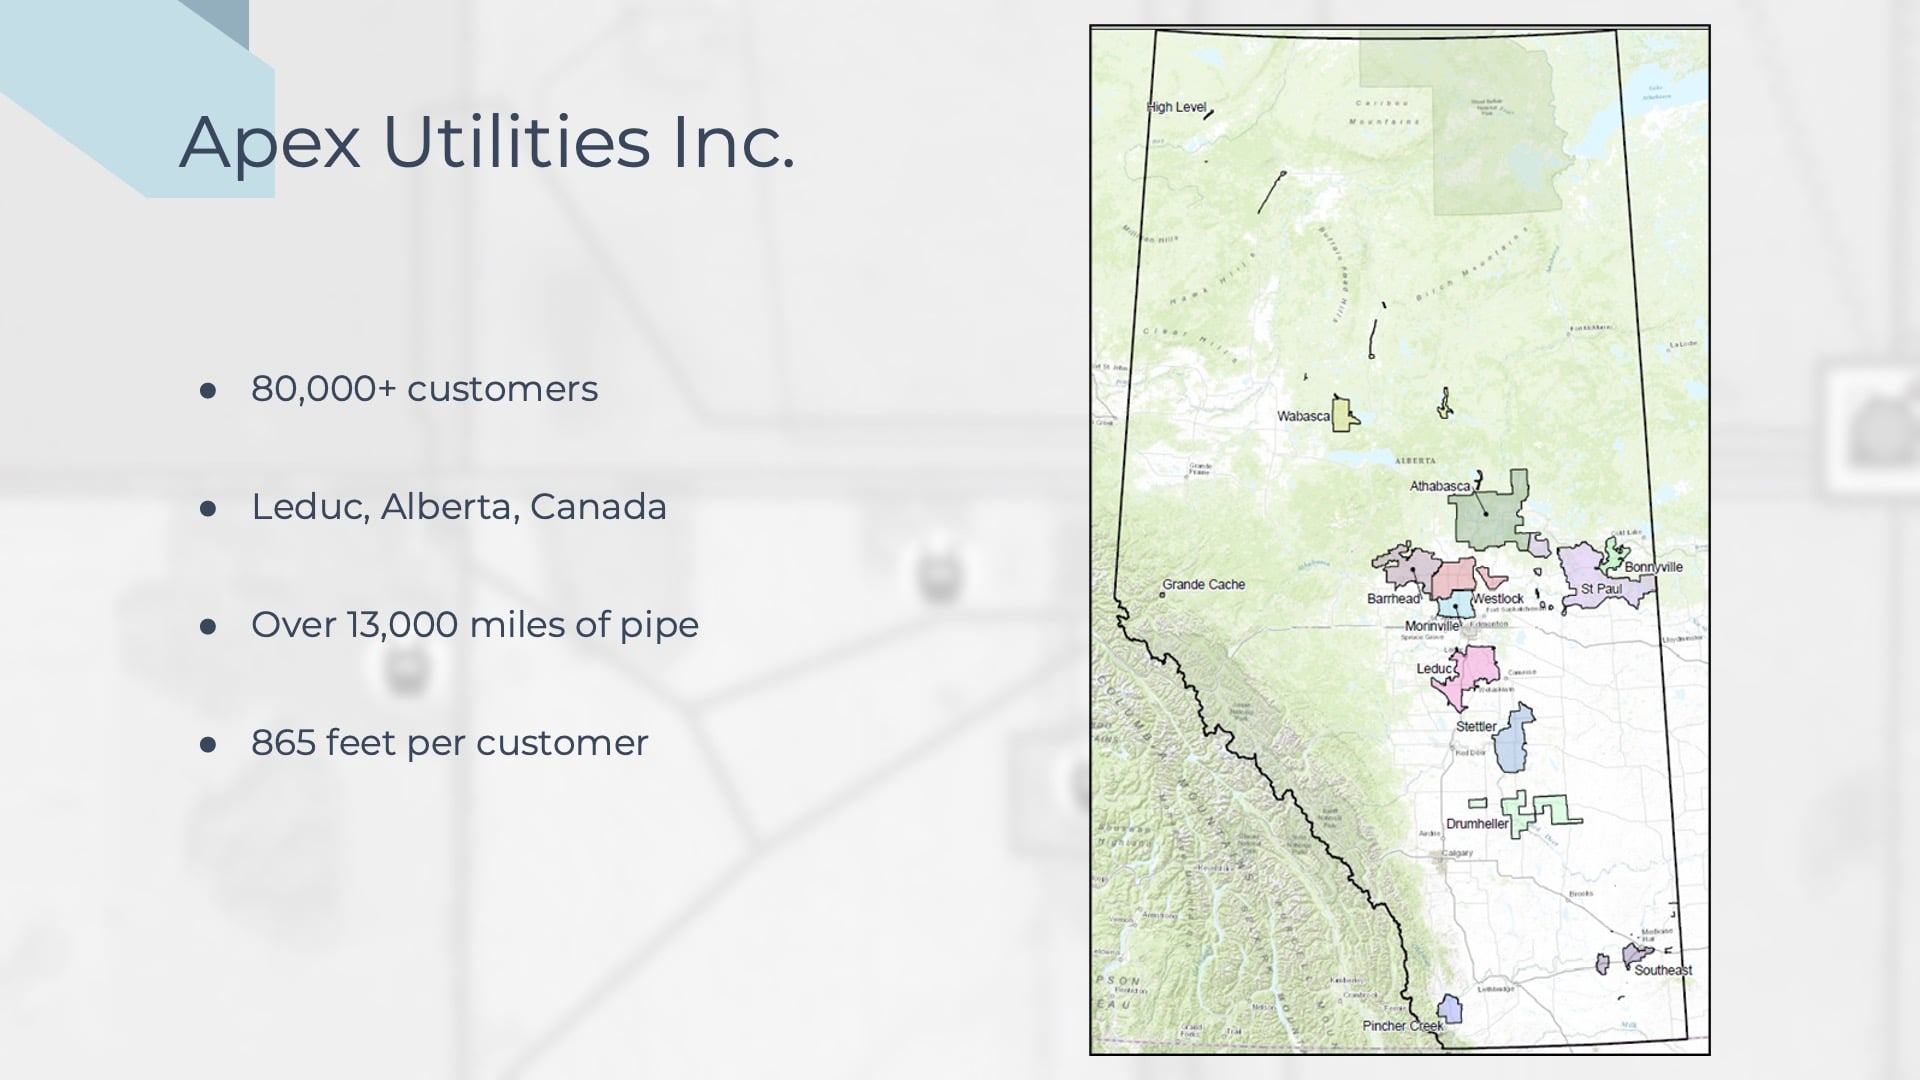 The first slide in Mathew Desbiens presentation tells viewers about the company, Apex Utilities Inc. Apex Utilities is a Canadian company serving over 80,000 customers with gas service throughout the expansive province of Alberta. This large province is displayed on a map on the righthand side of the slide.